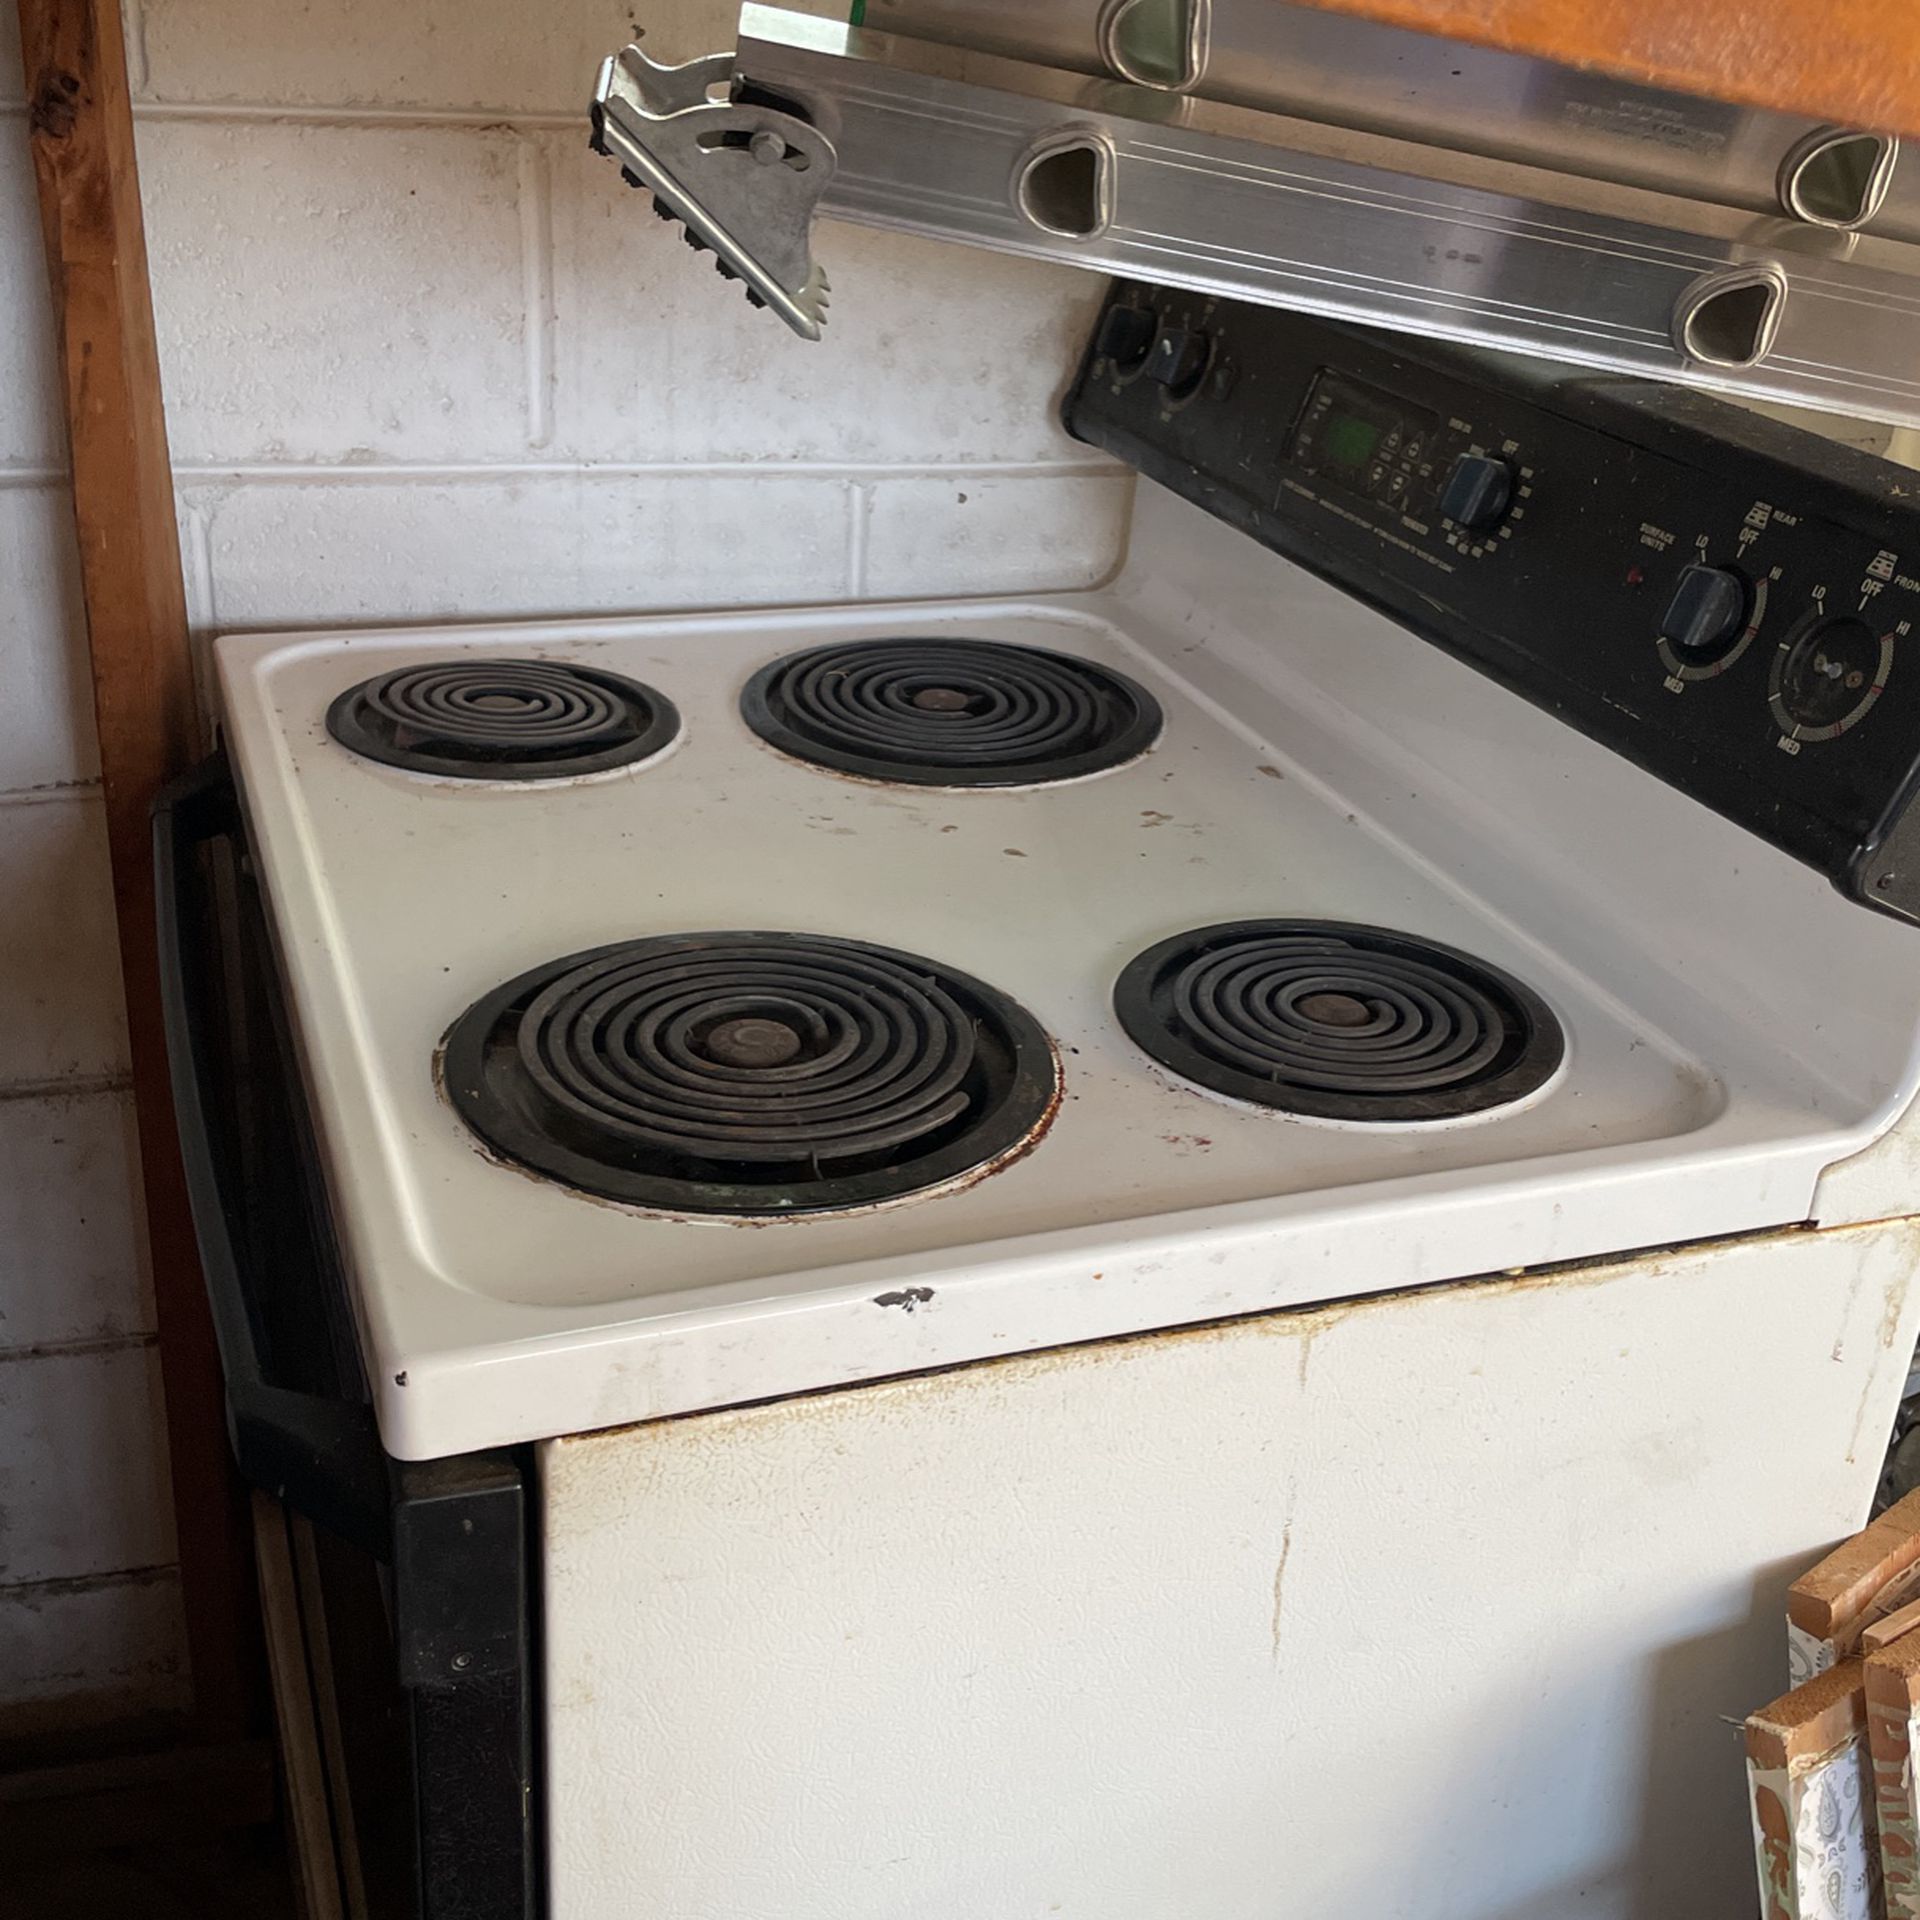 Stove Free Works But Needs Good Cleaning